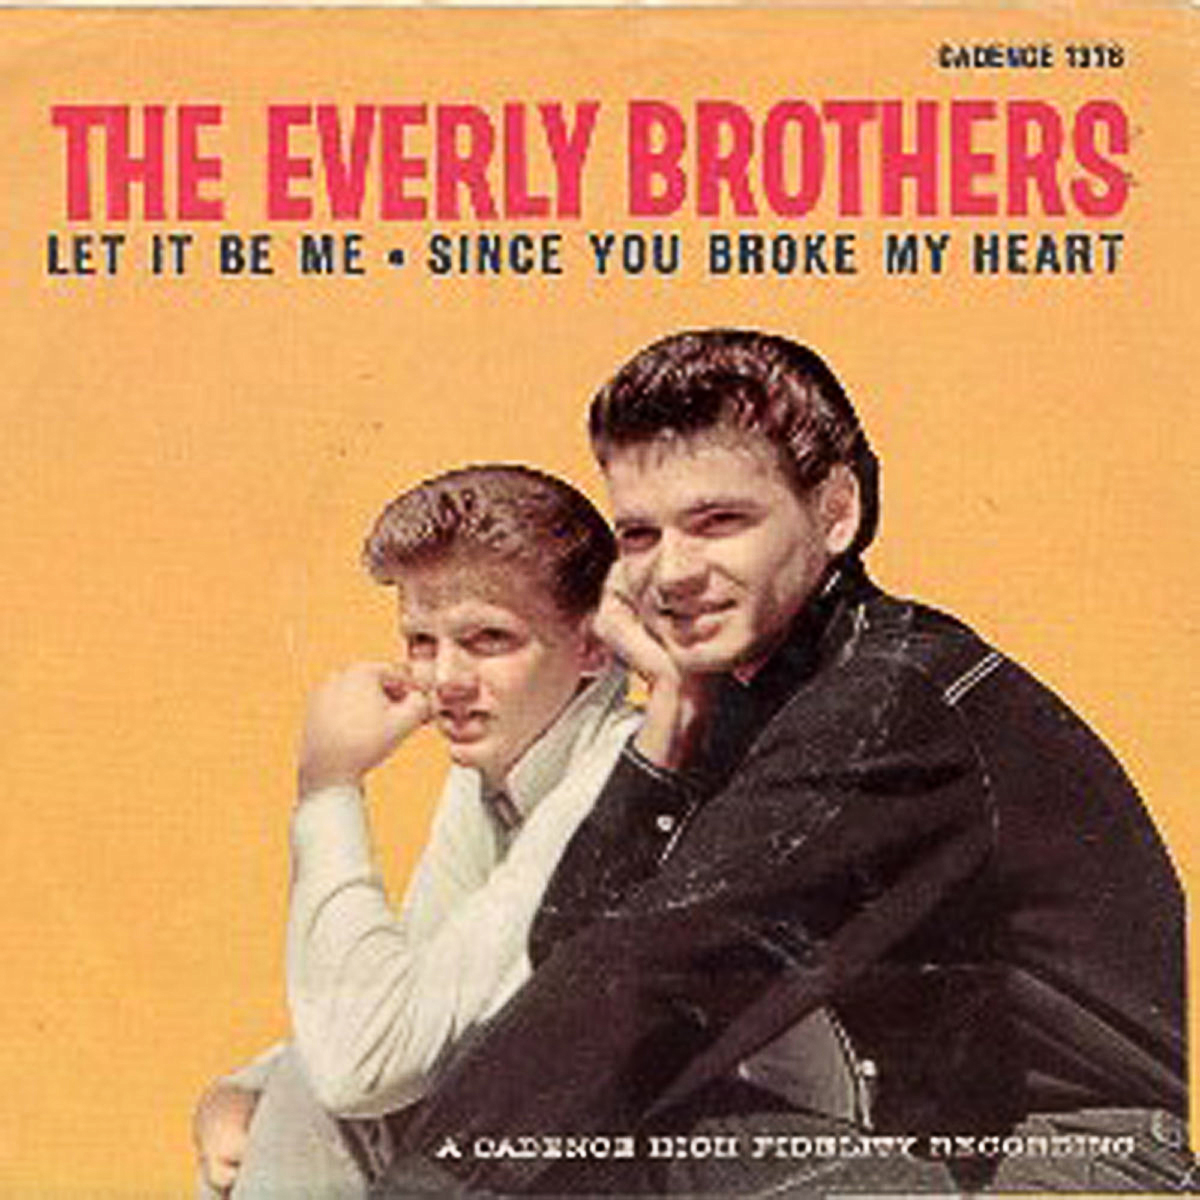 “Let It Be Me” - The Everly Brothers 1959